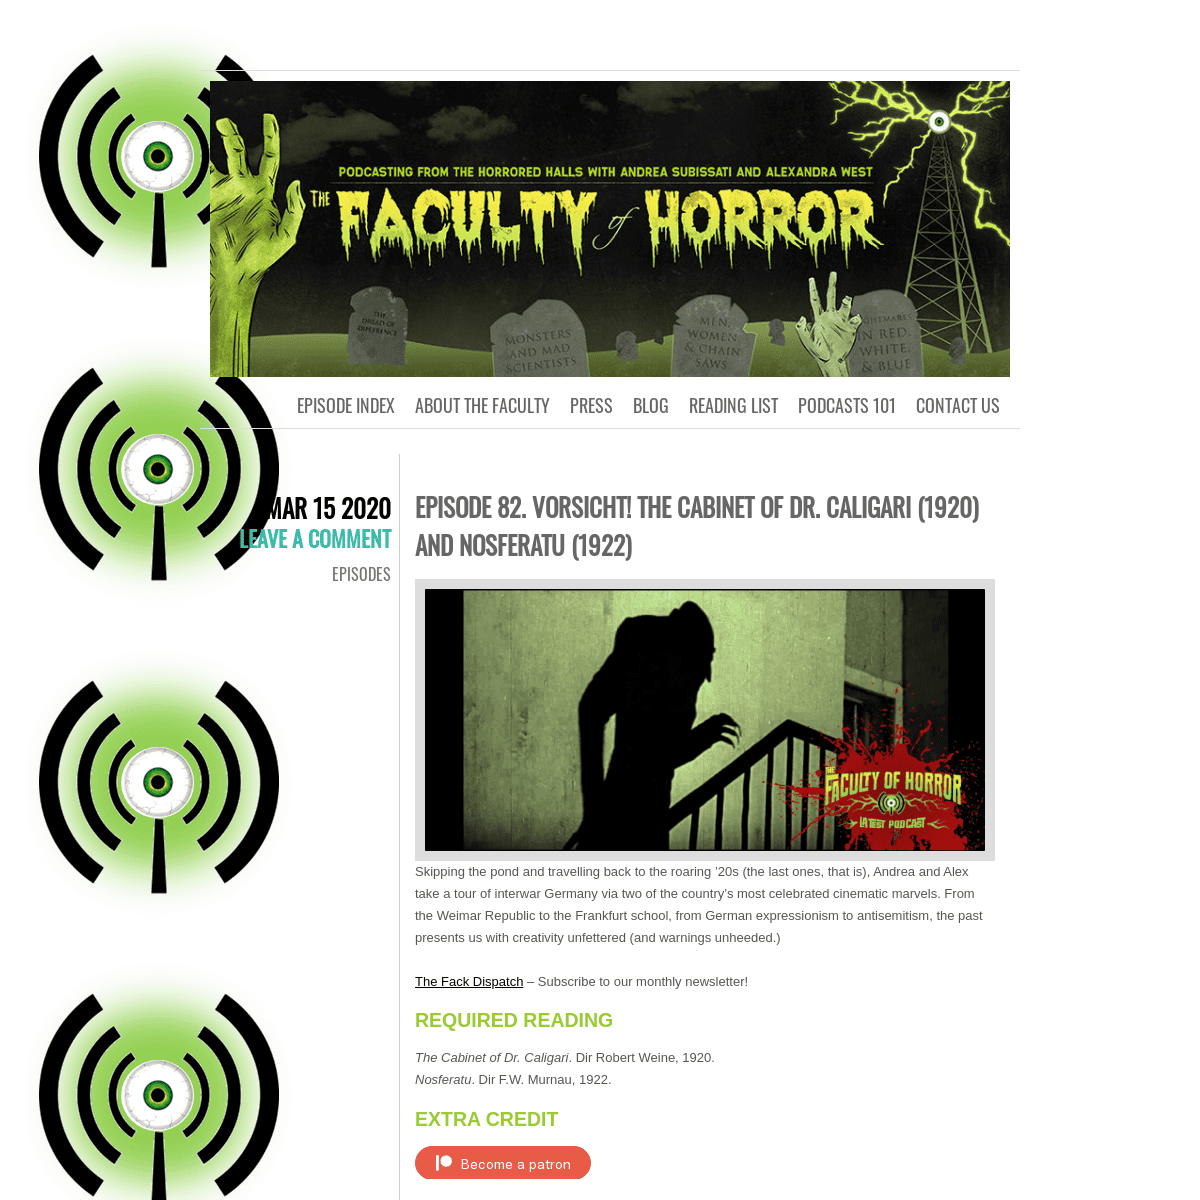 A complete backup of facultyofhorror.com